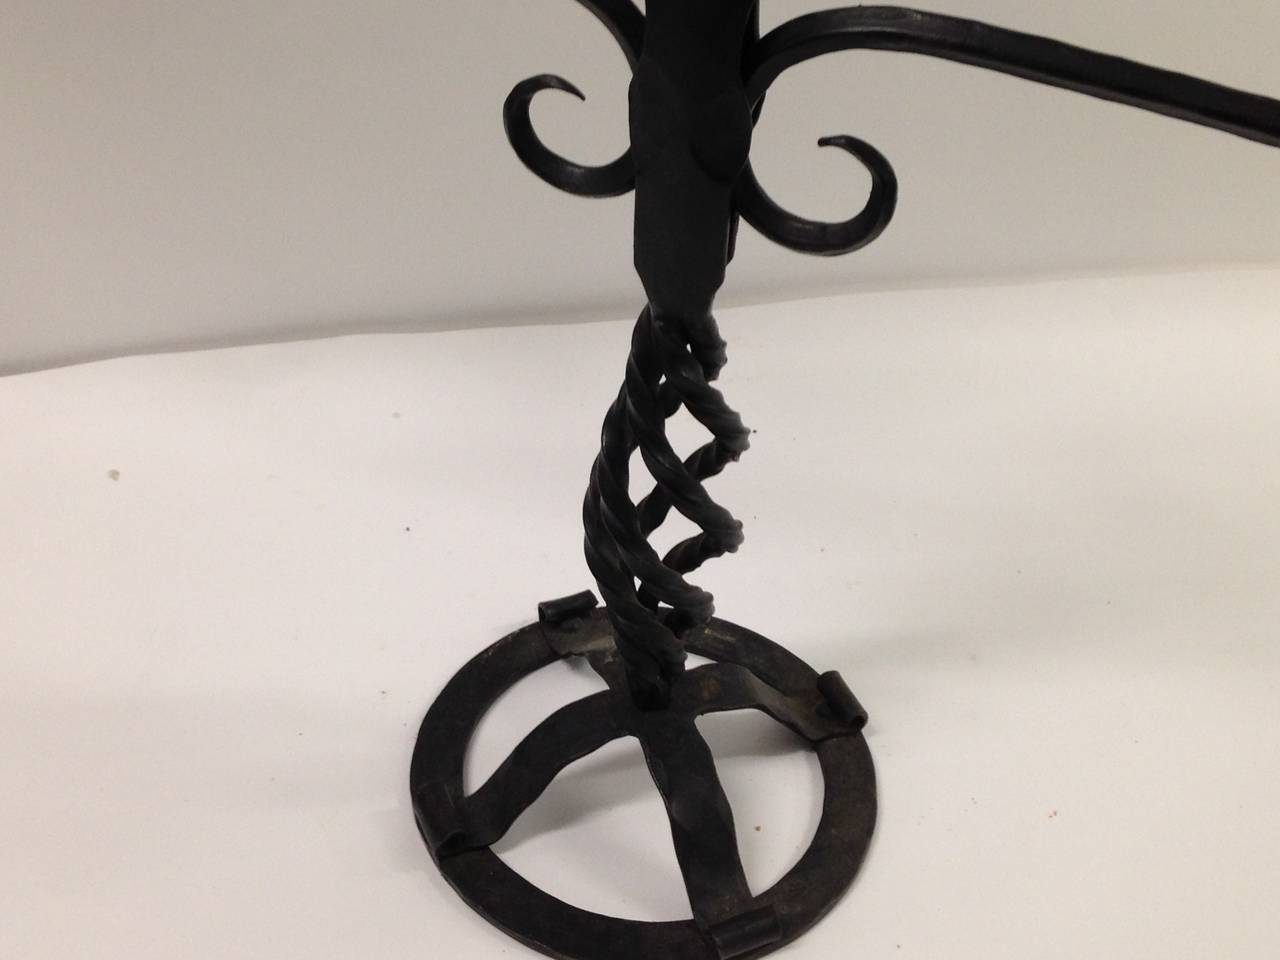 Hand-forged iron with open strap work base, twisted shaft rising to a Silhouette
of seven arms. Each square bobeche is ornamented with a pair leaves. Stamped on base 